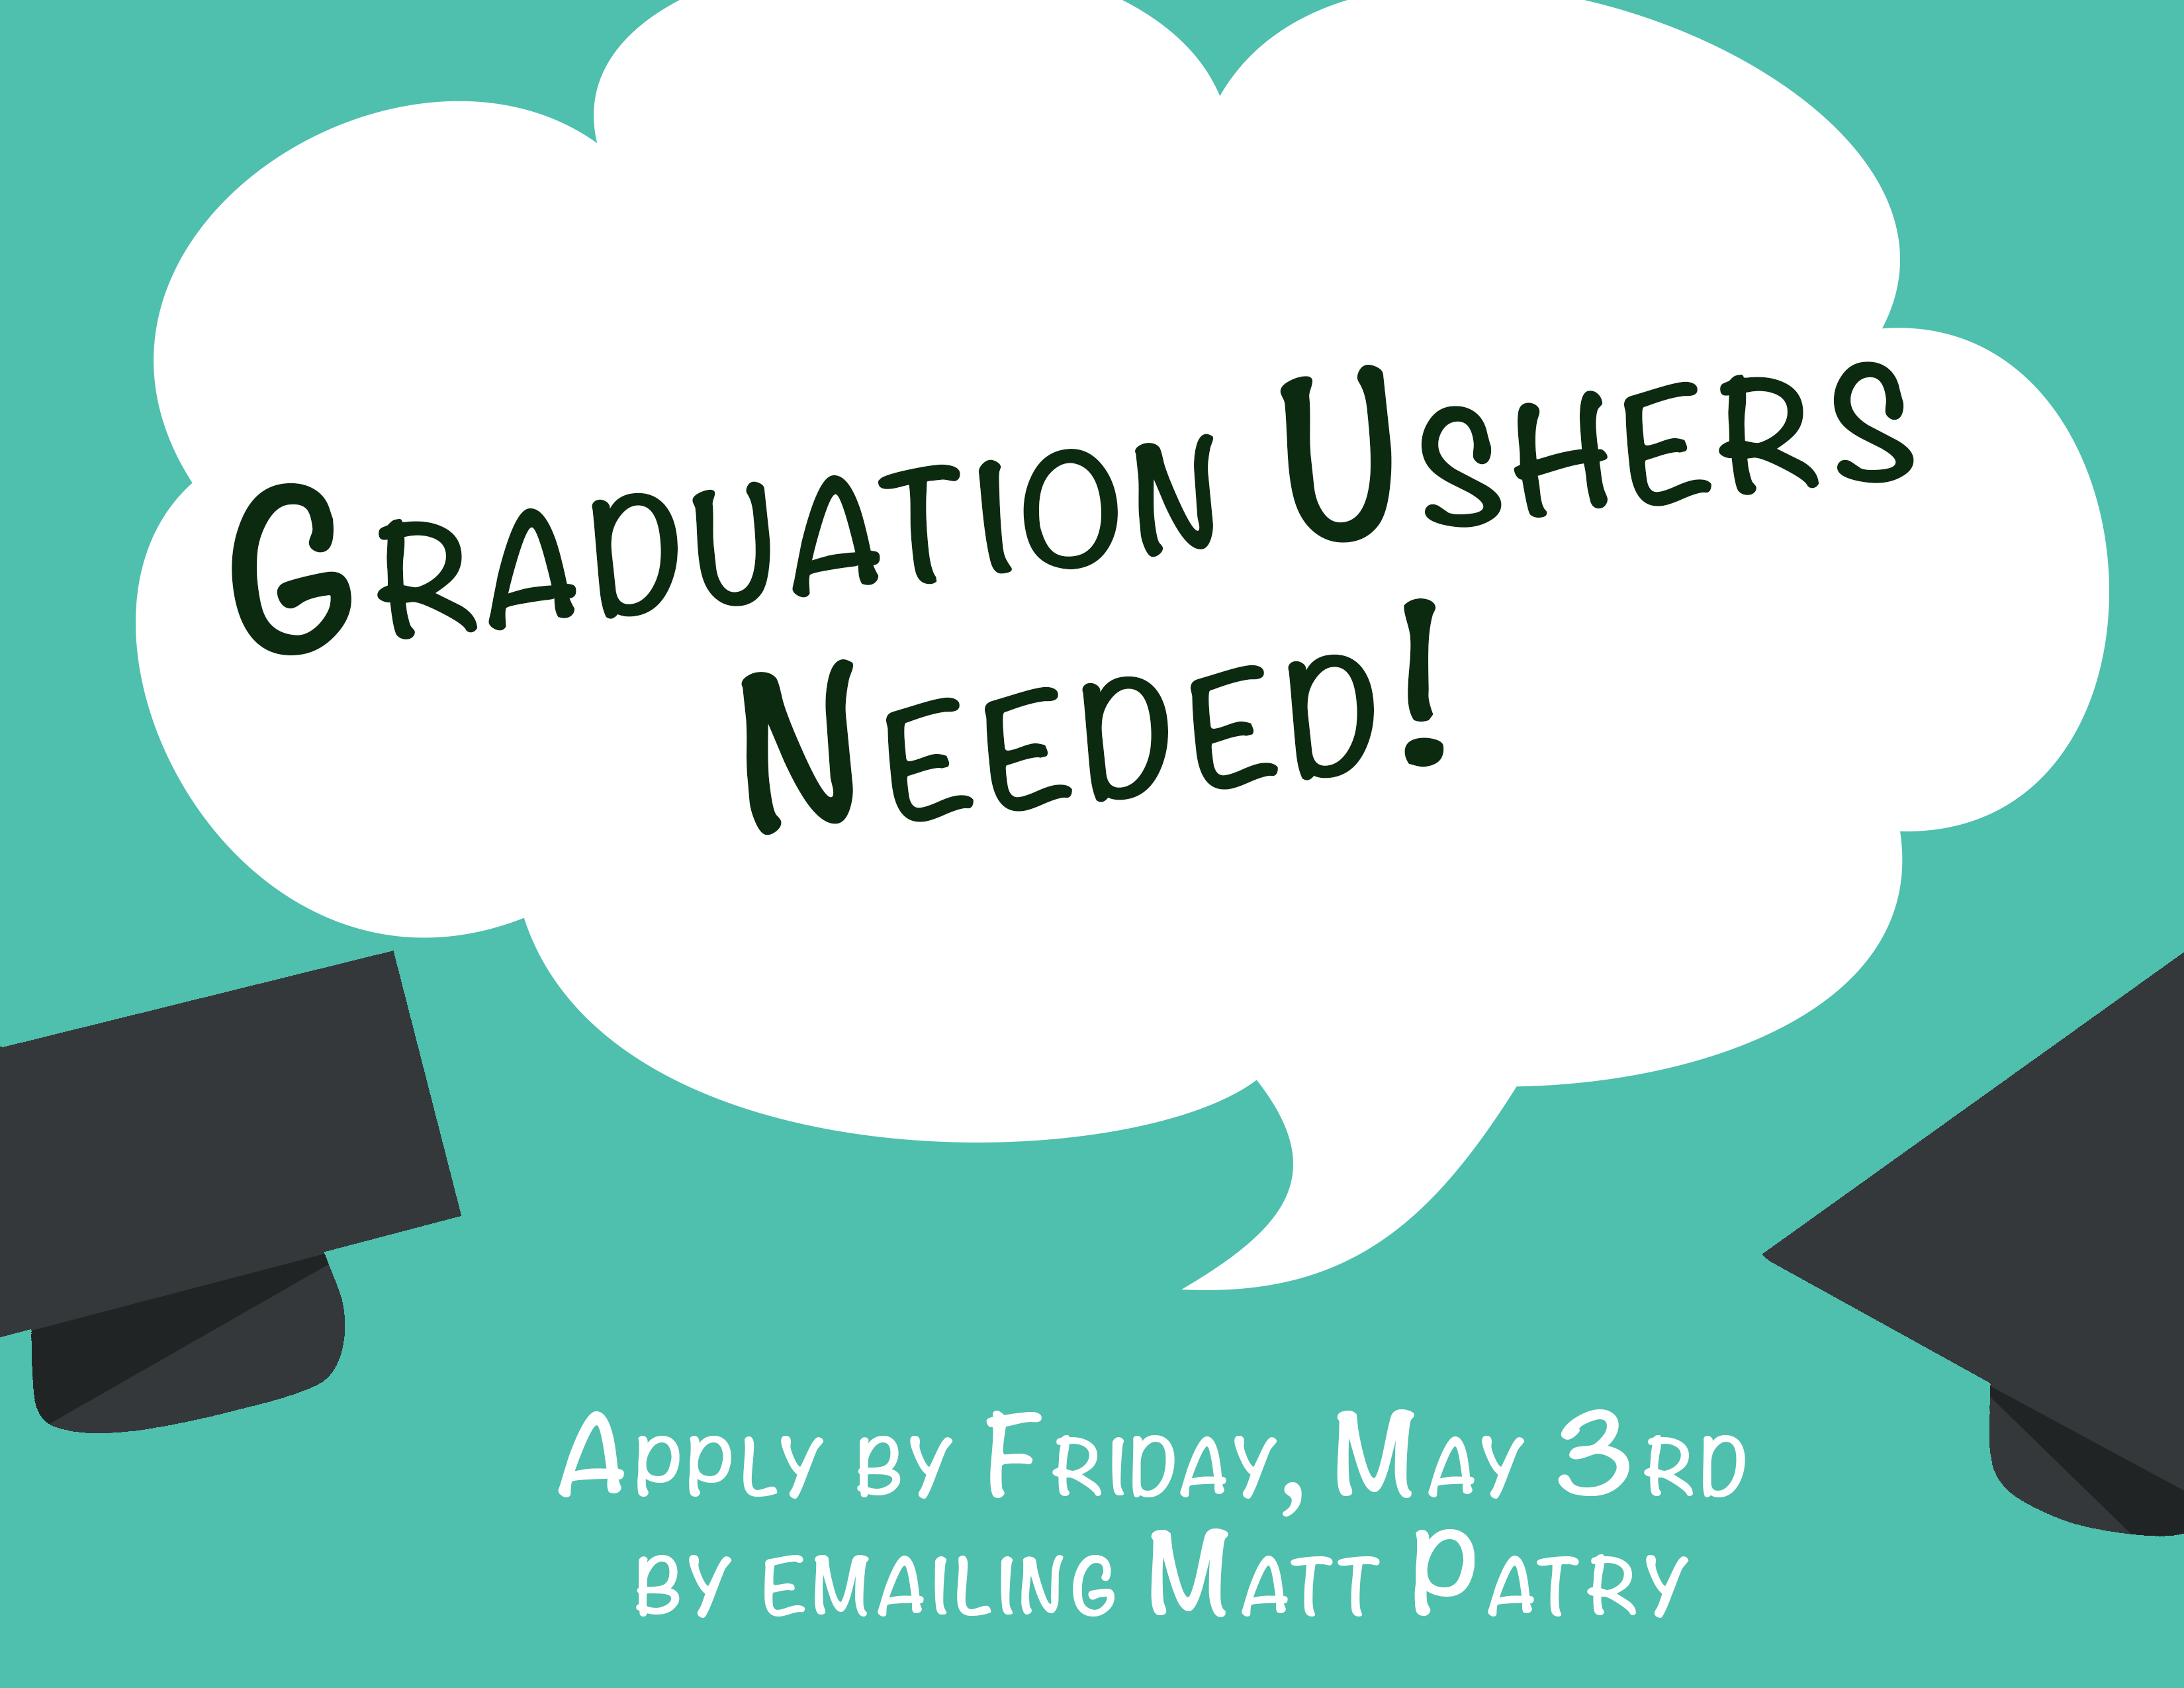 Graduation Ushers Needed! Apply by Friday, May 3rd by emailing Matt Patry 